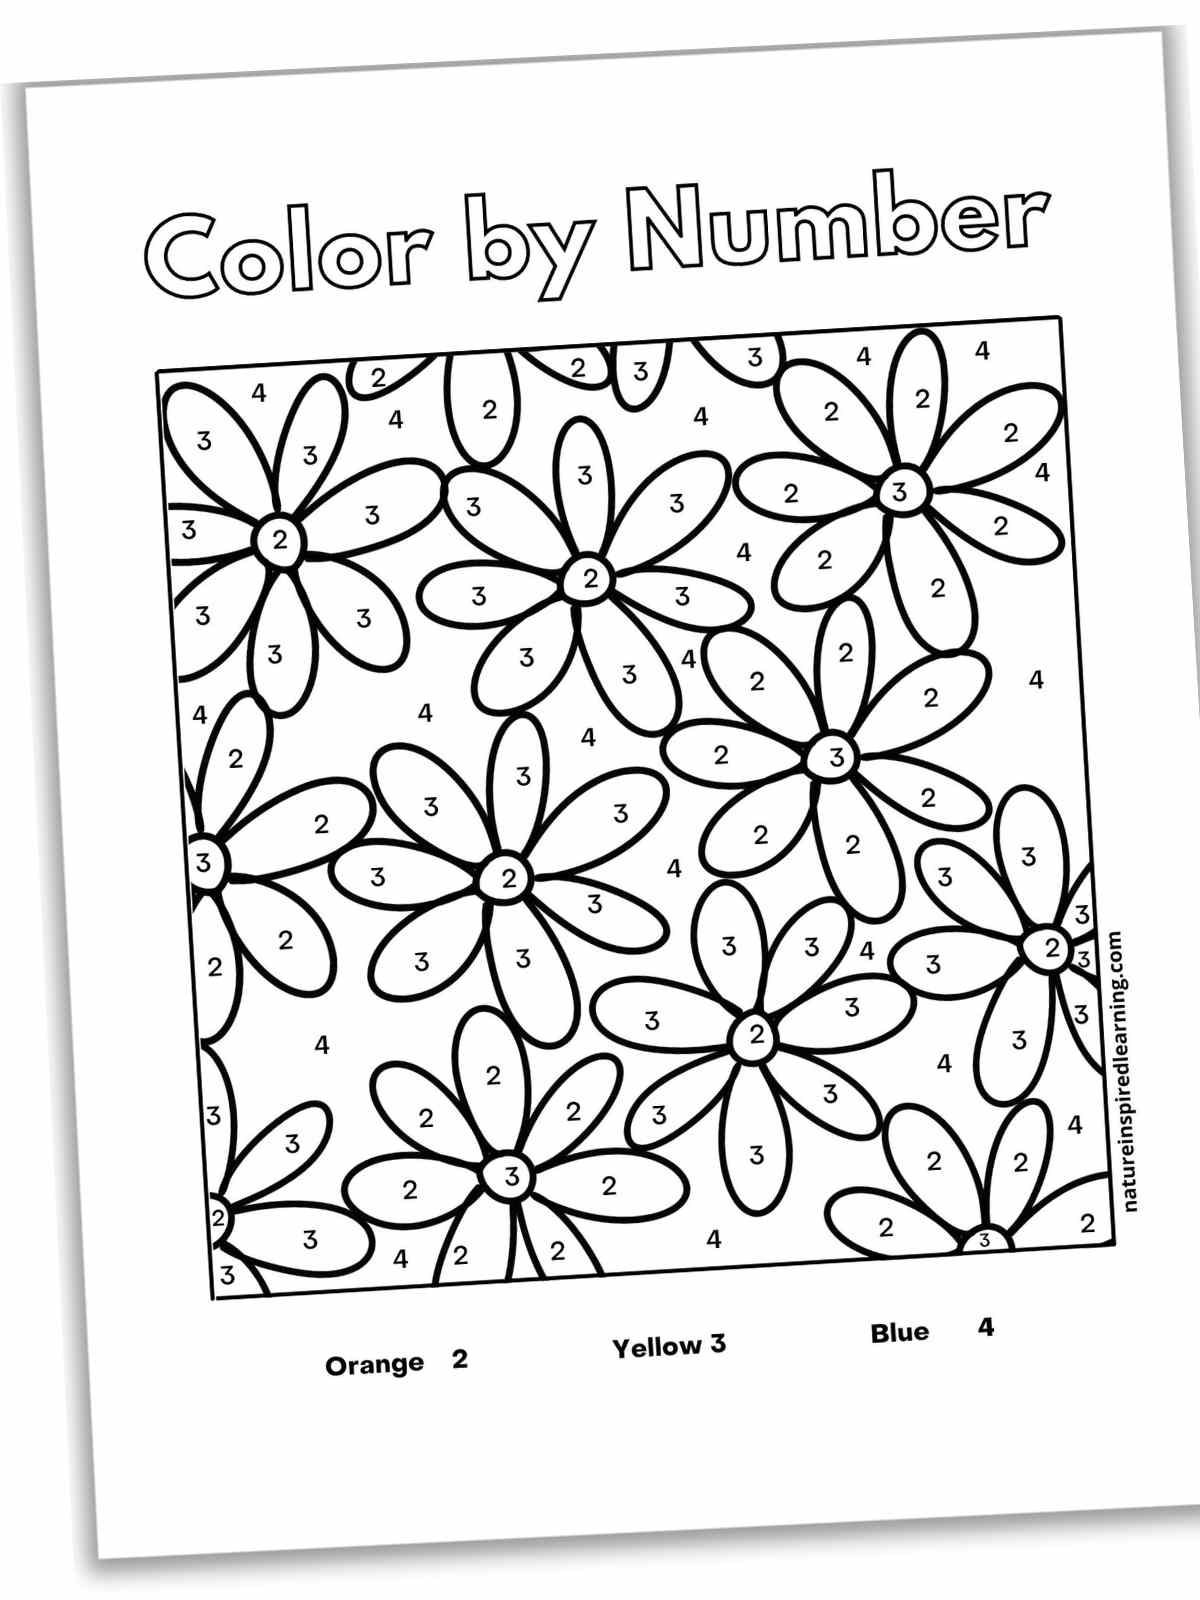 Flowers, Animals And Pretty Patterns Color By Number: Coloring Pages For  Kids And Teens | kids coloring books ages 8-12